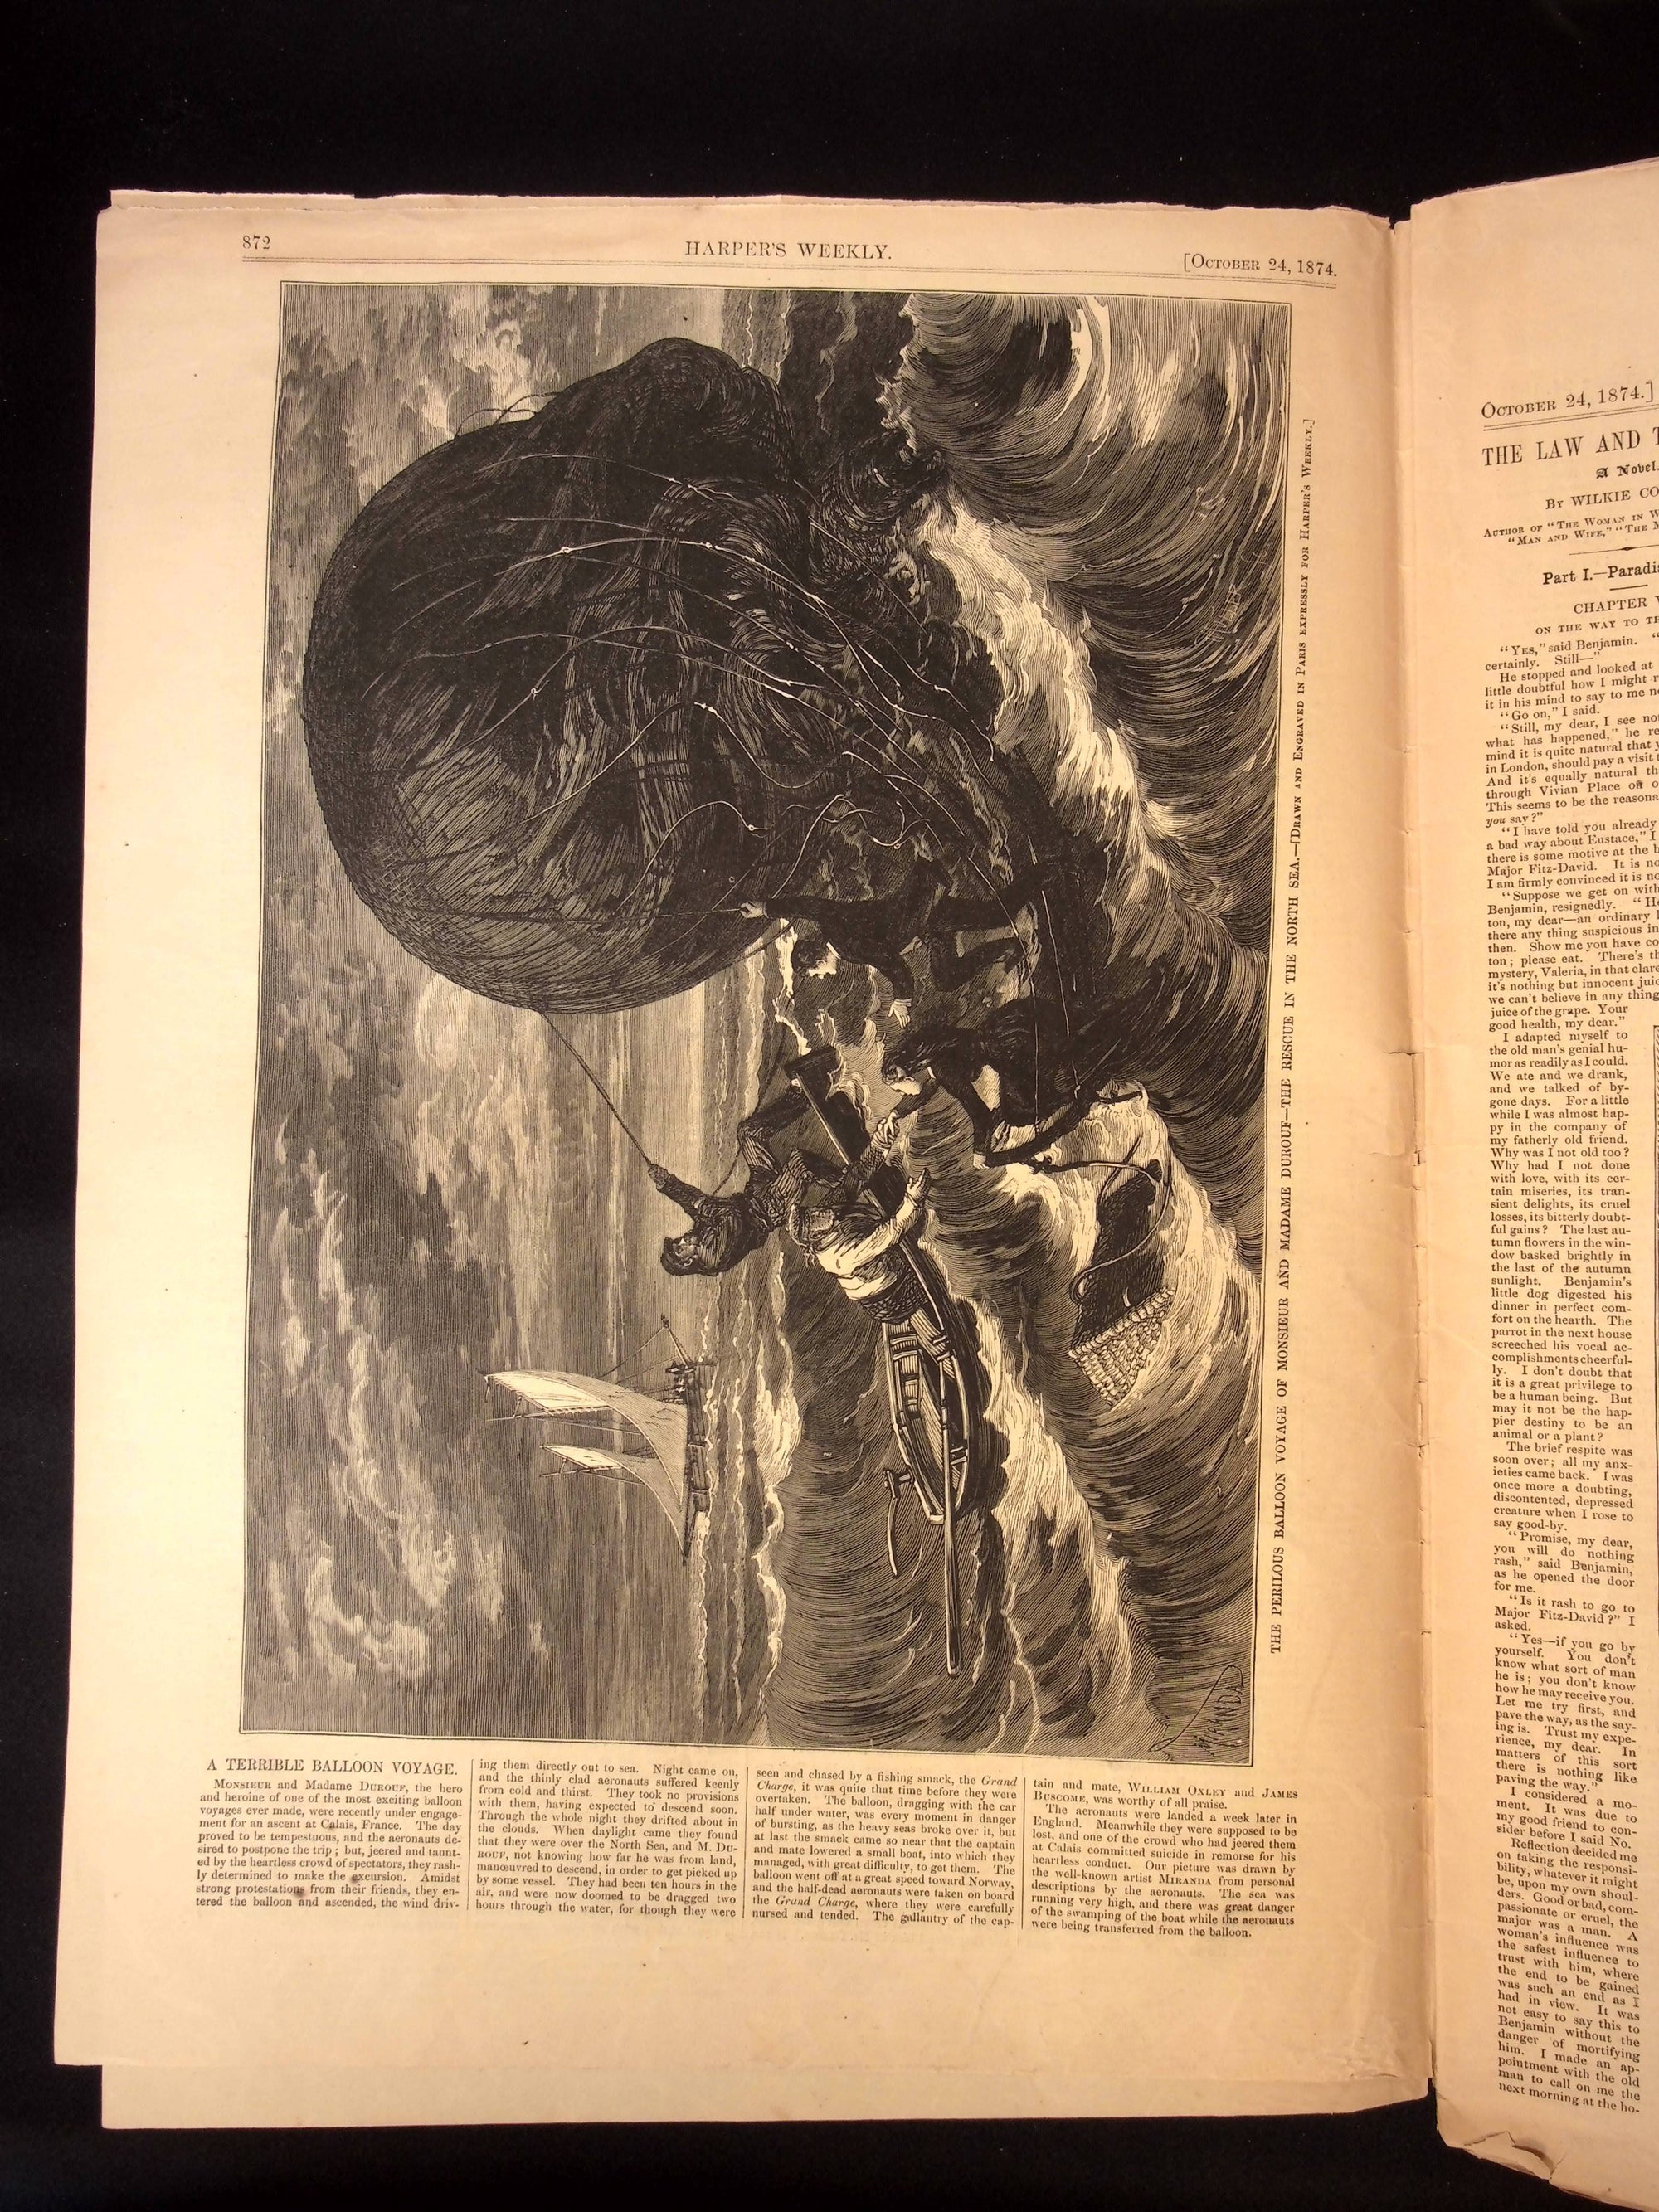 Harper's Weekly: Ullyses S. Grant Reelection Cartoon, Cairo Egypt Centerfold — Oct. 24th, 1874